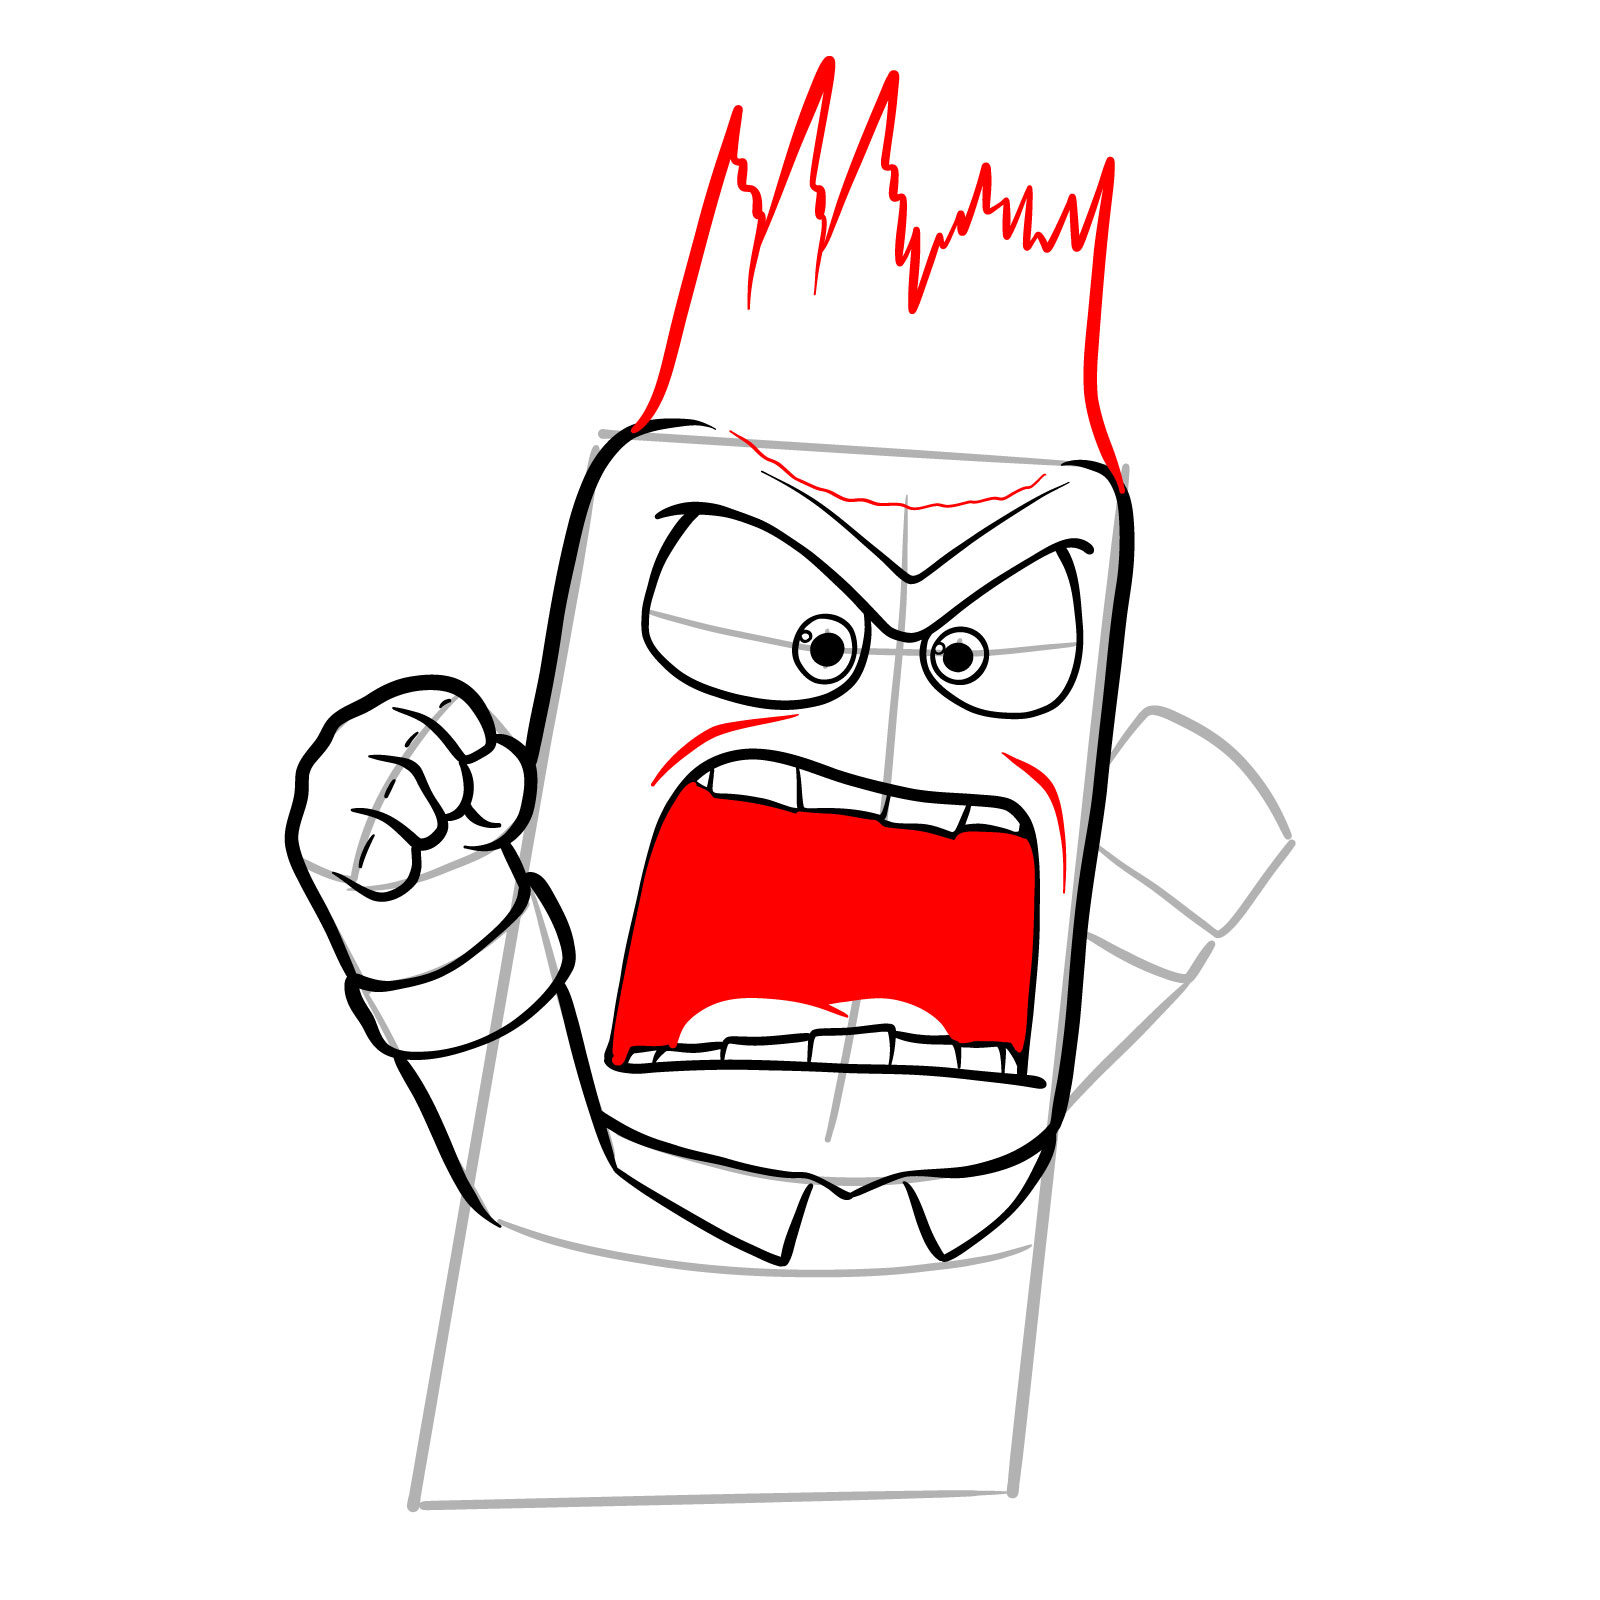 How to draw angry Anger with his head in flames - step 08